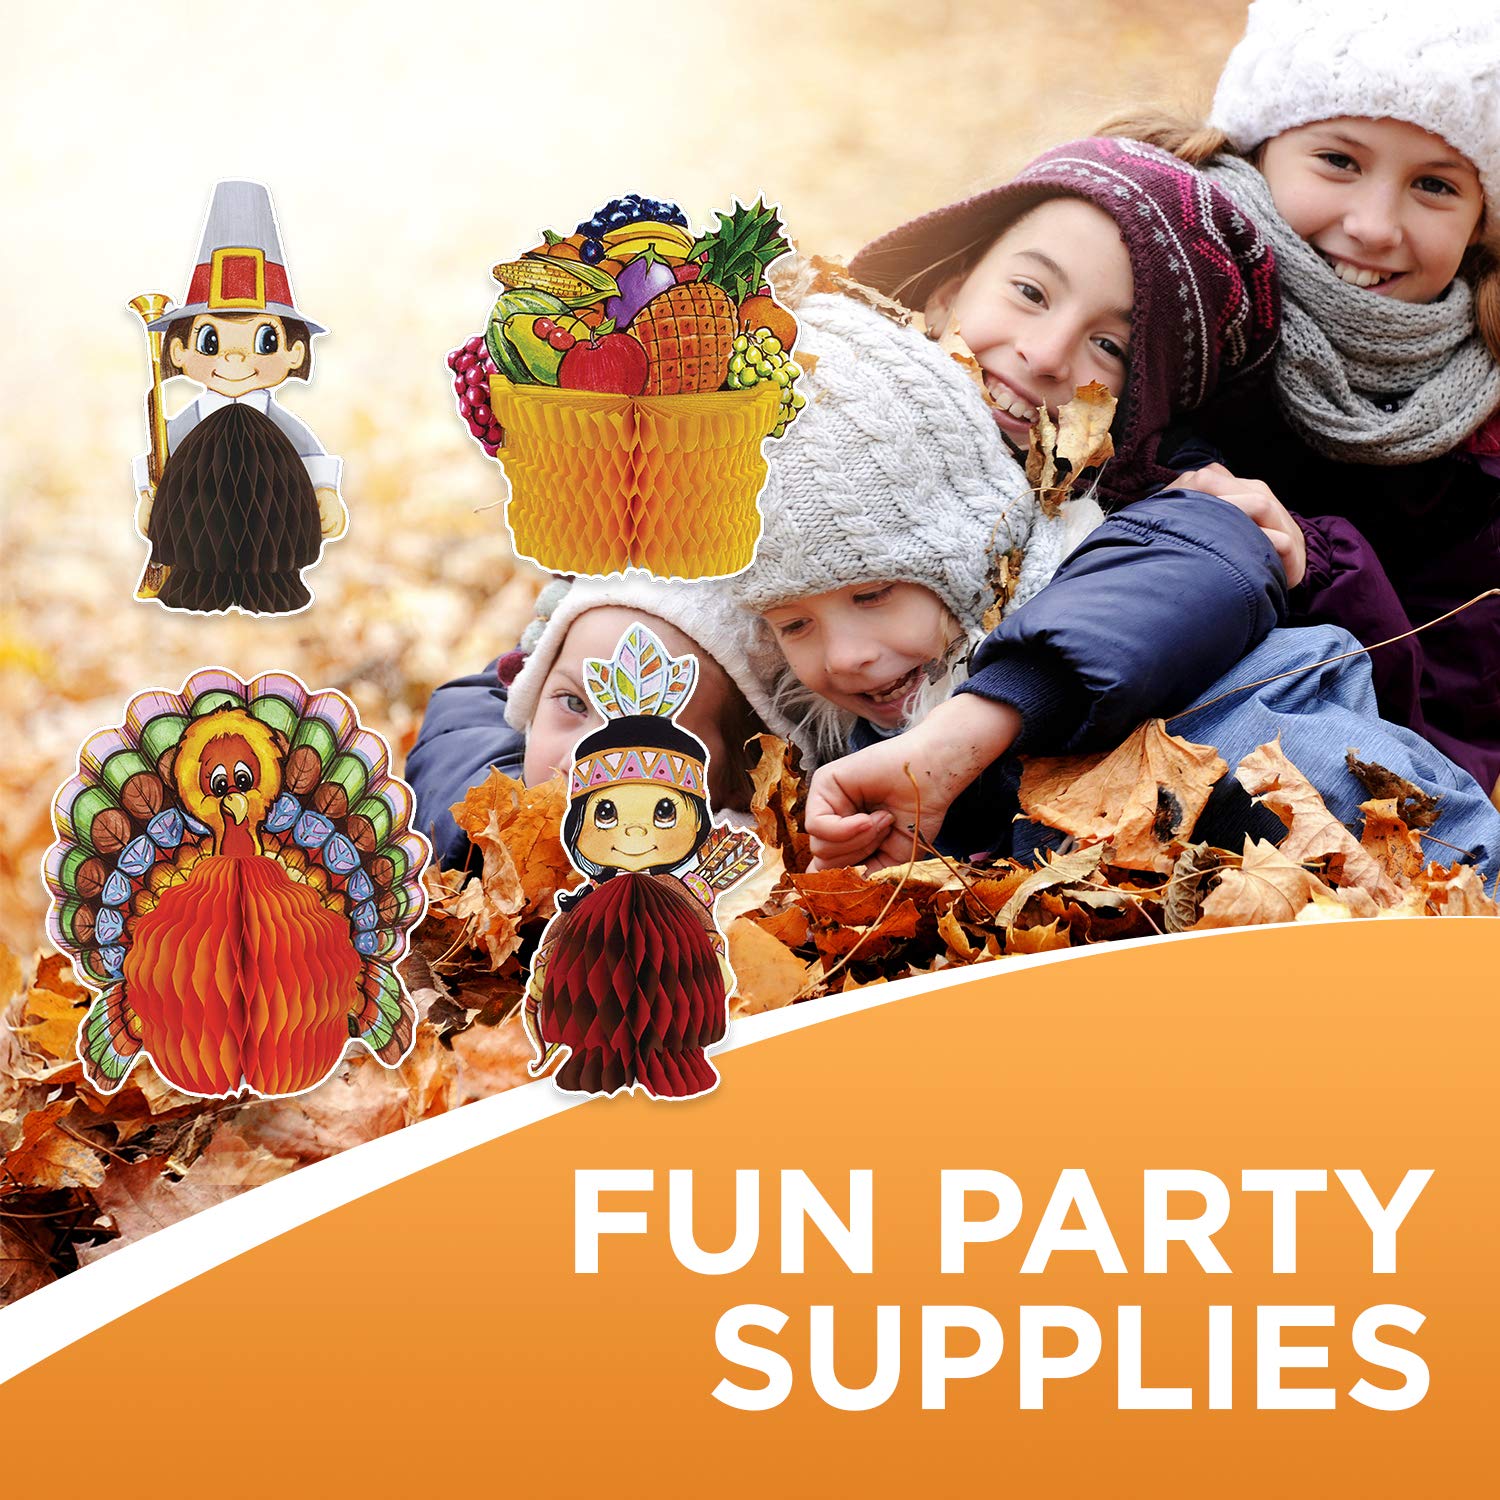 Beistle 4-Pack Decorative Thanksgiving Playmates, 4-Inch-5-Inch